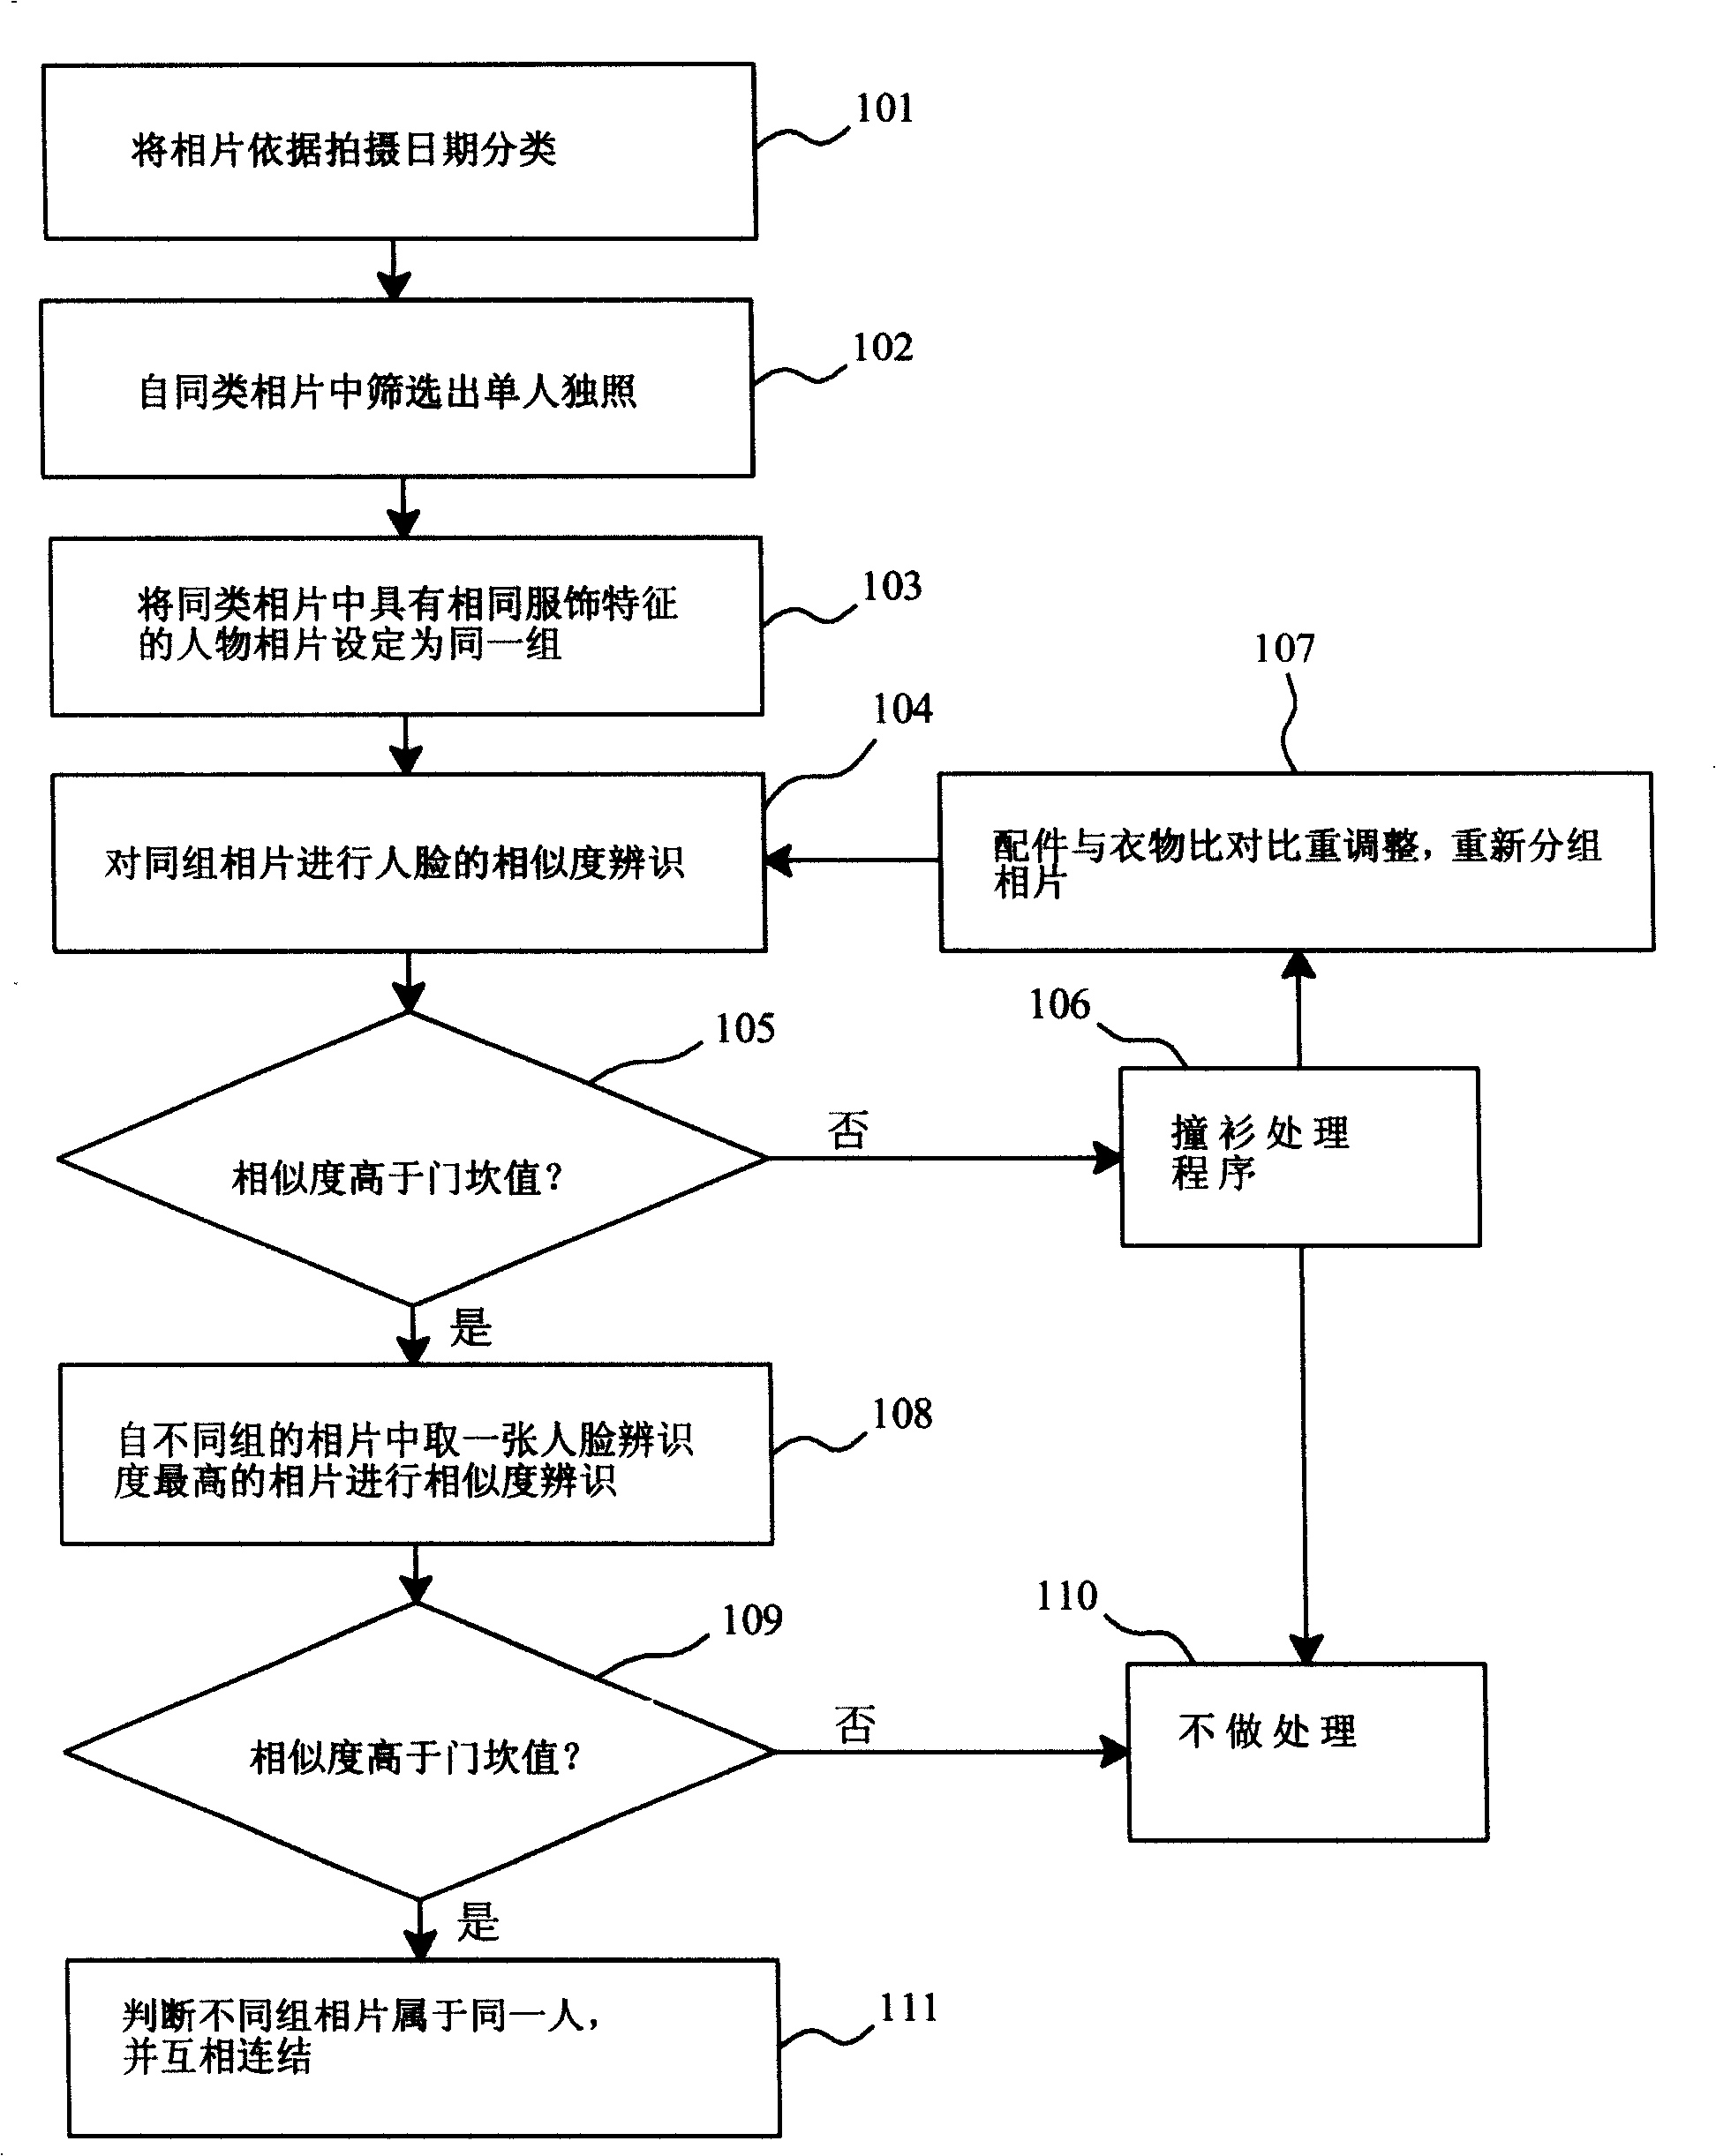 Method and system for photo management, photo classification code-storing computer-readable media